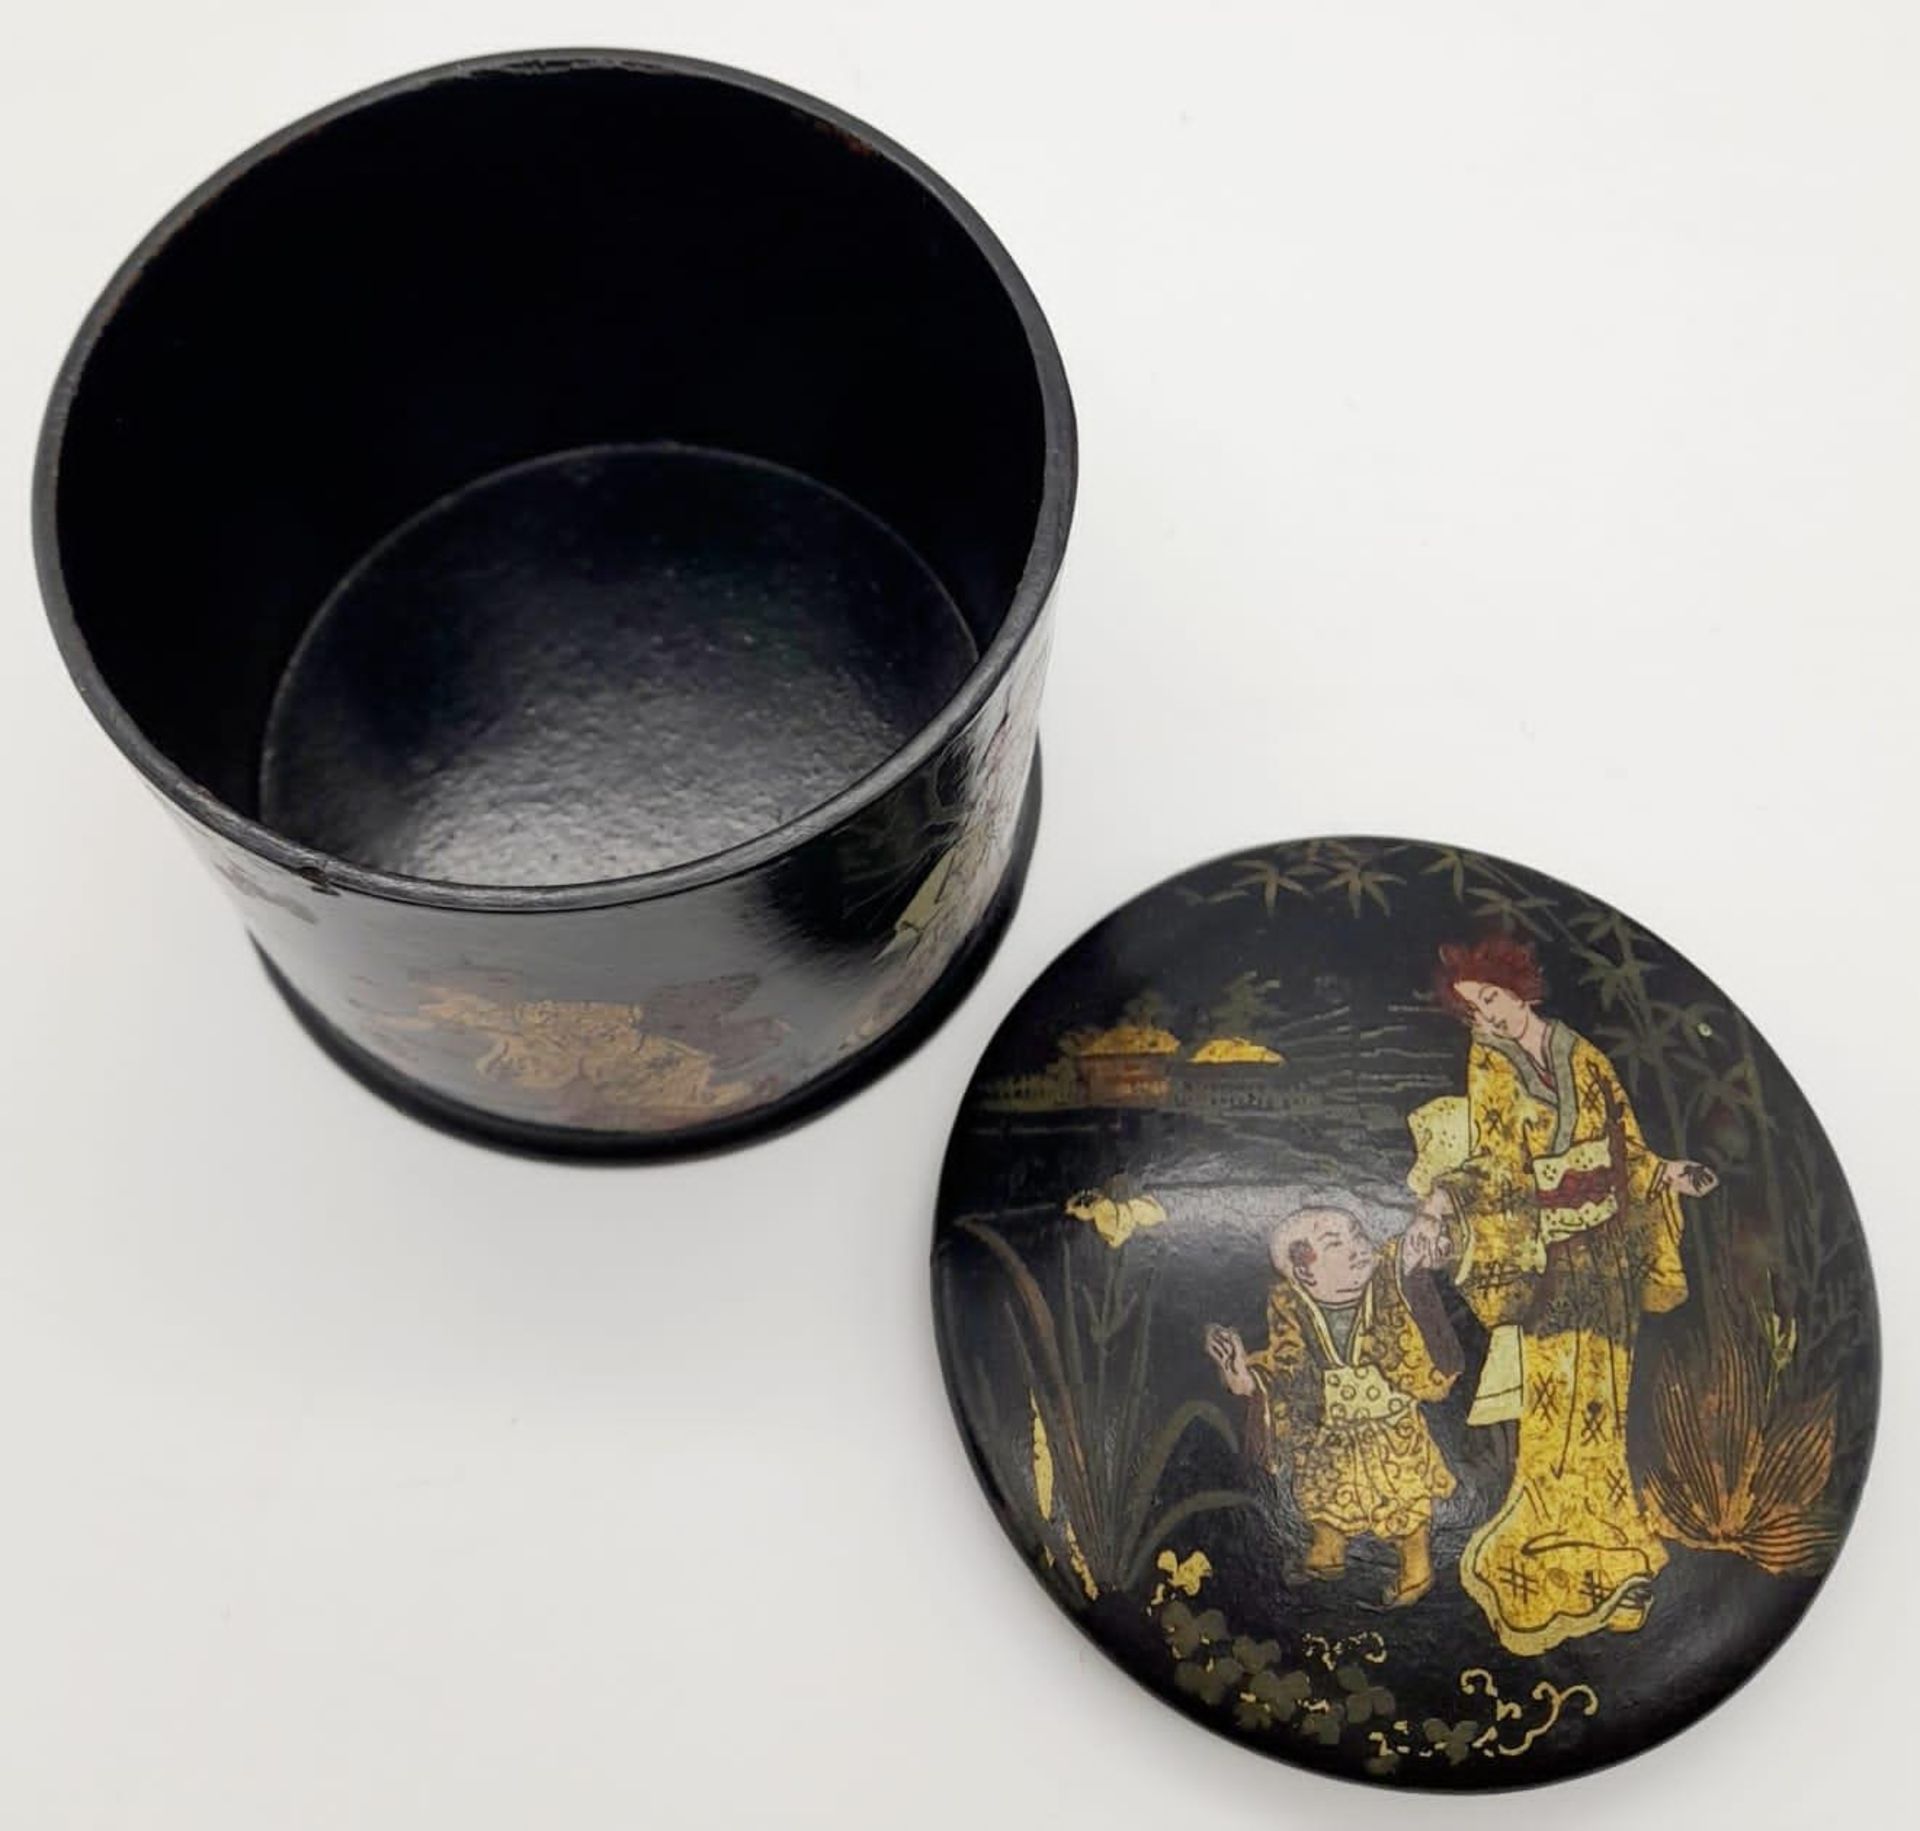 An Antique Chinese Black Lacquer Box. Wonderful decoration with gold on black depicting Mothers at - Image 4 of 13